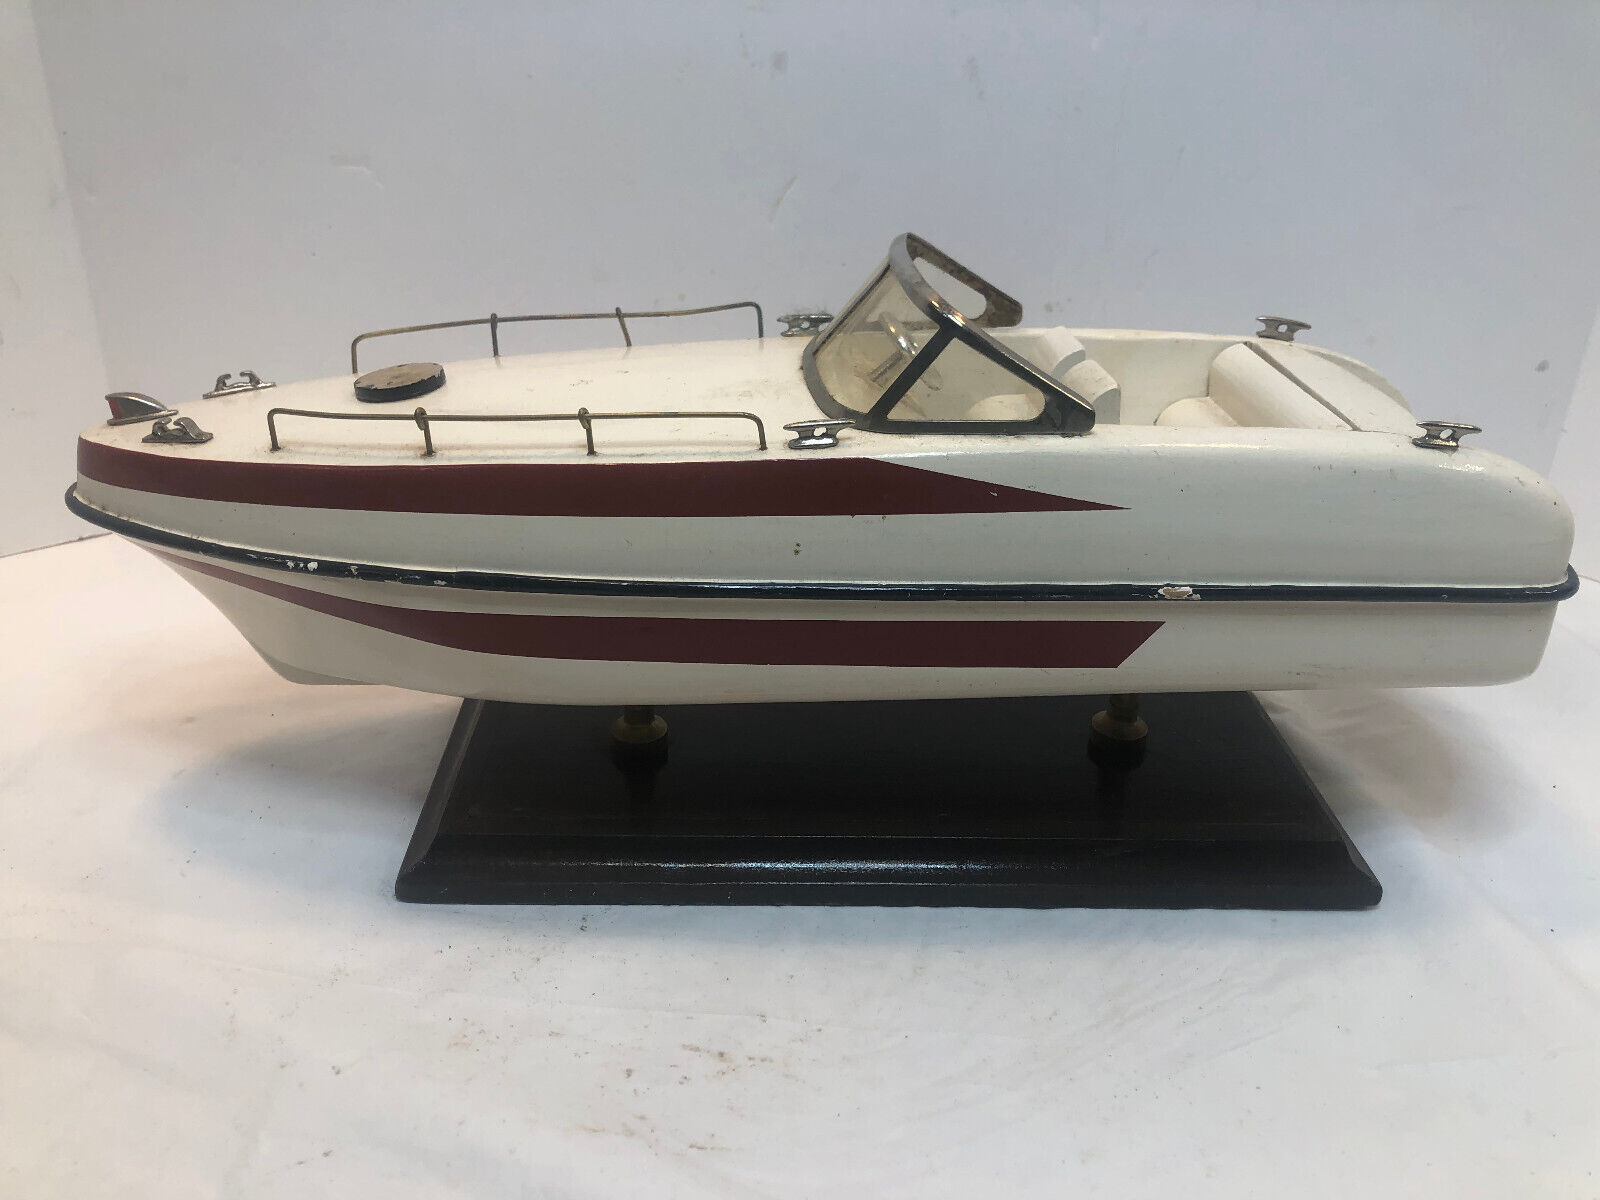 Vintage Model Speed Boat - Wooden 16”1950s 1960’s Nautical Decor